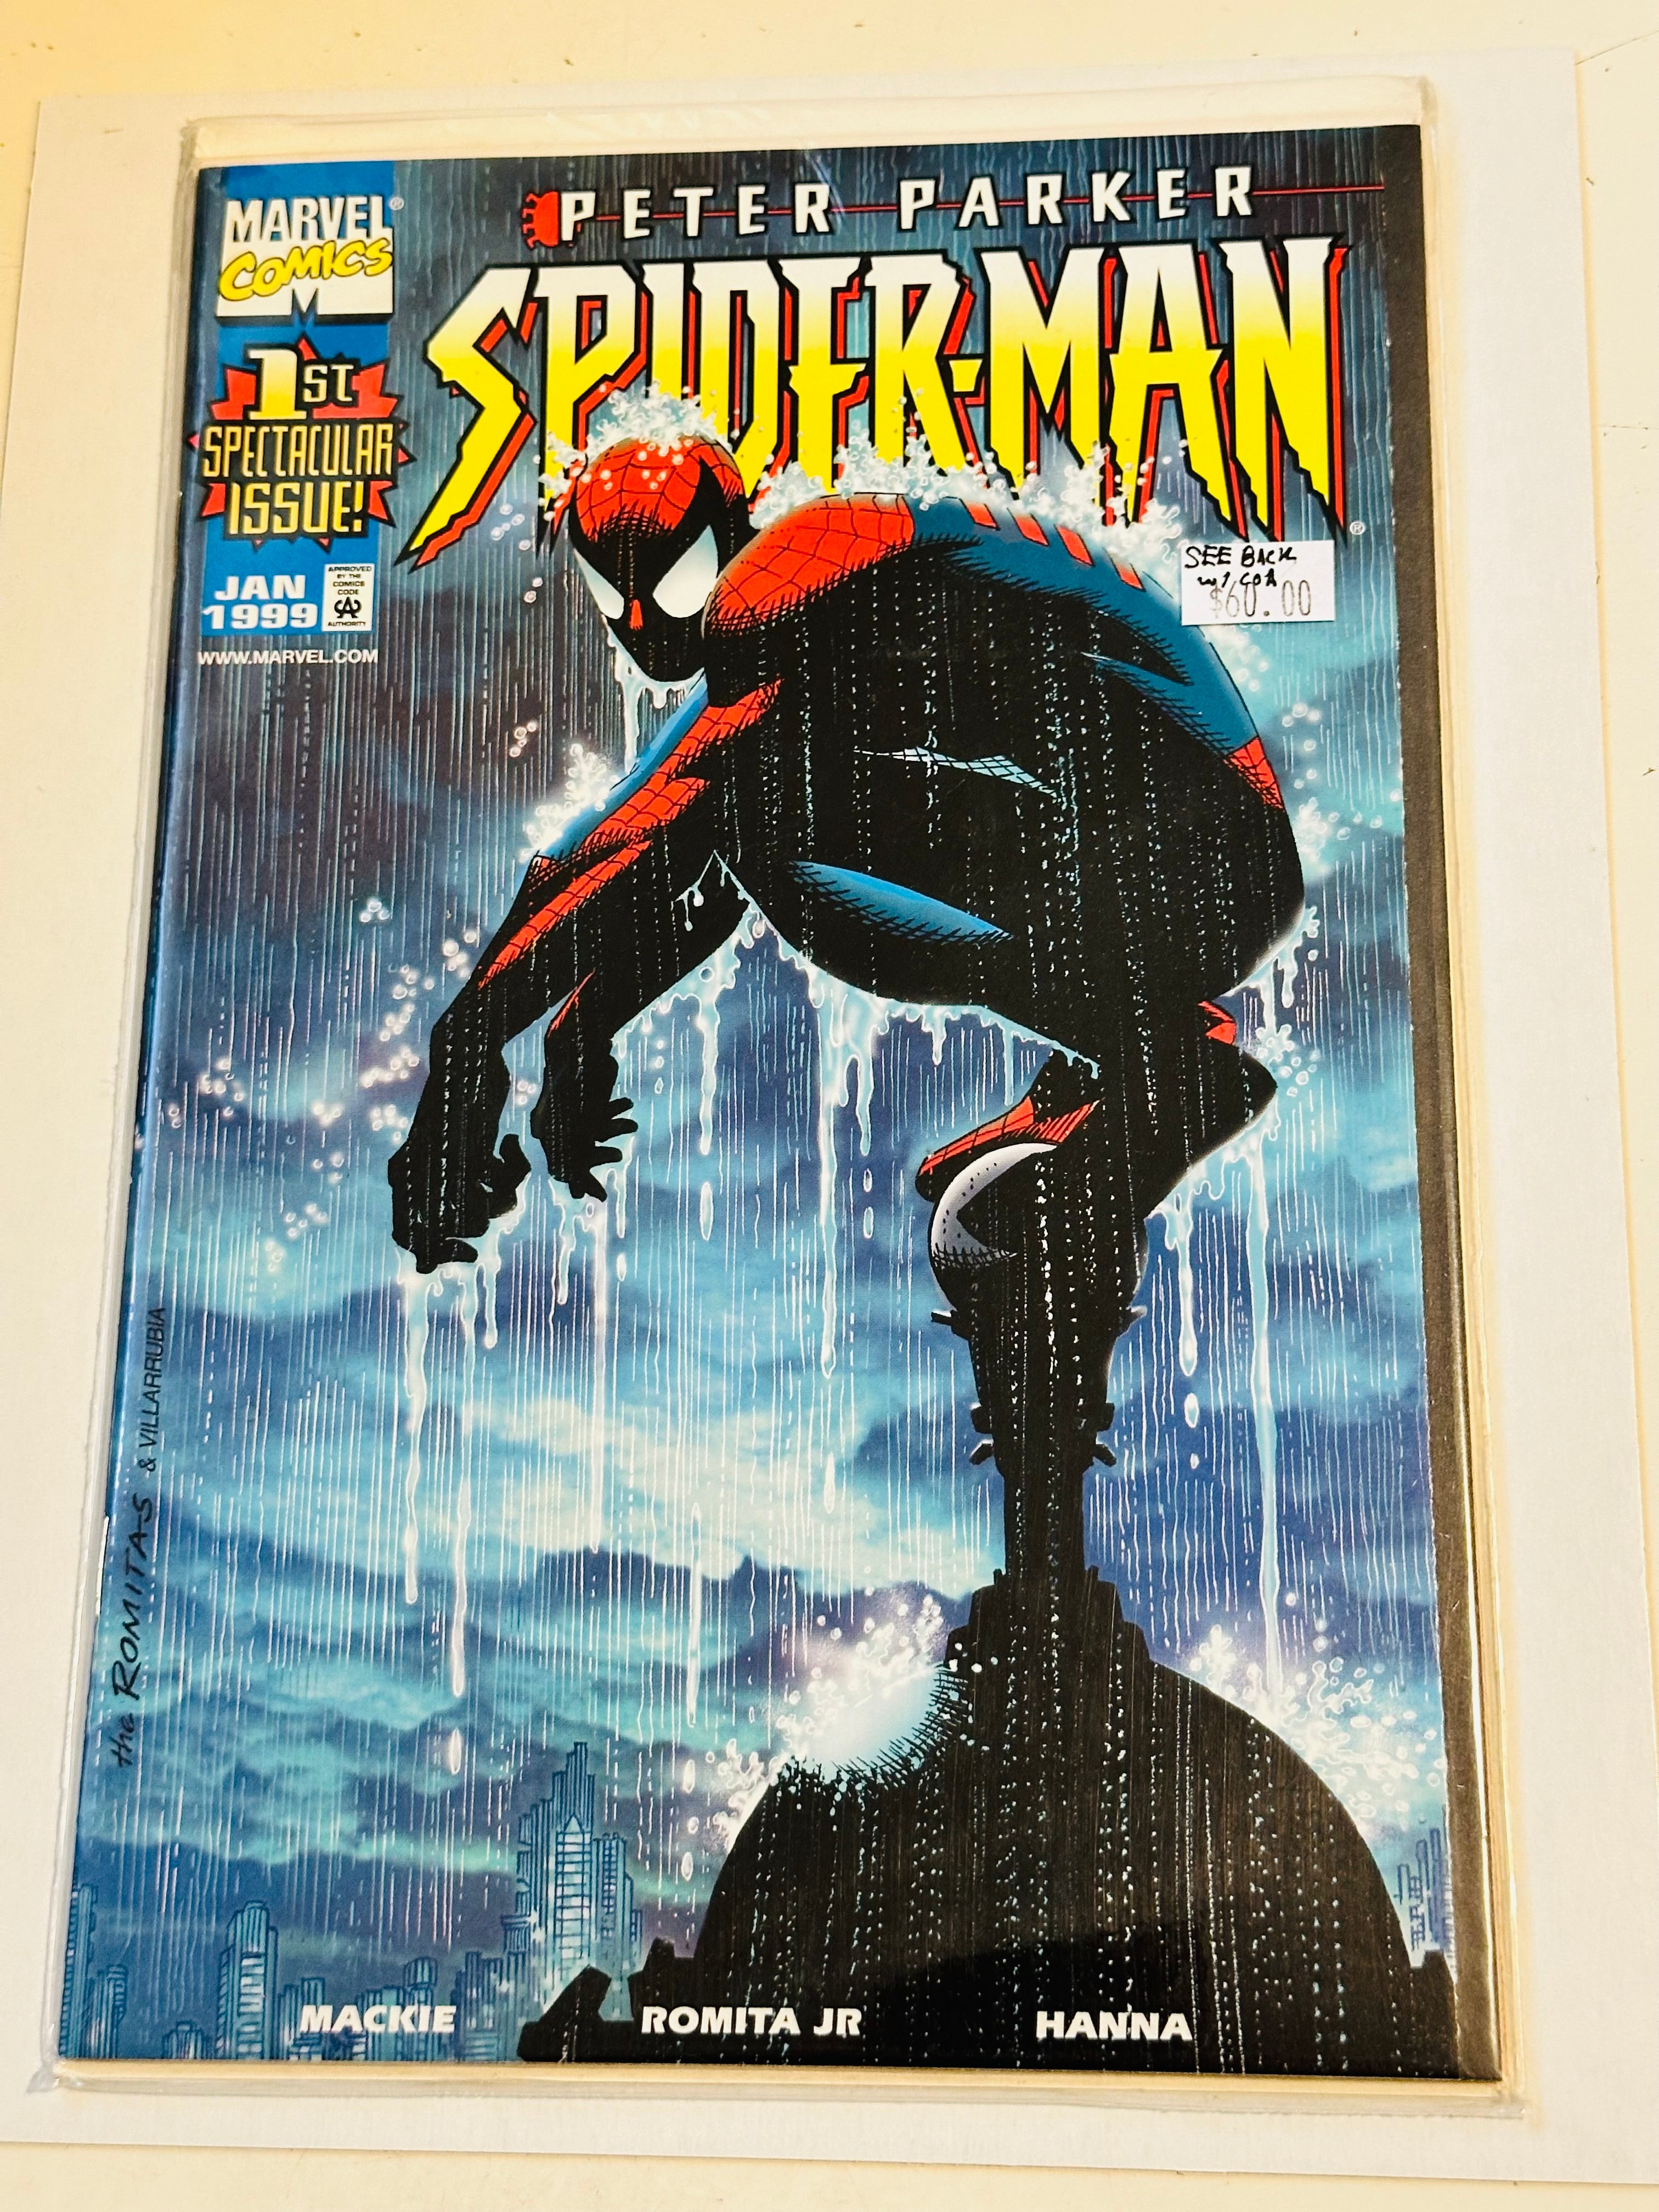 Peter Parker Spider-man #1 variant cover with COA on back